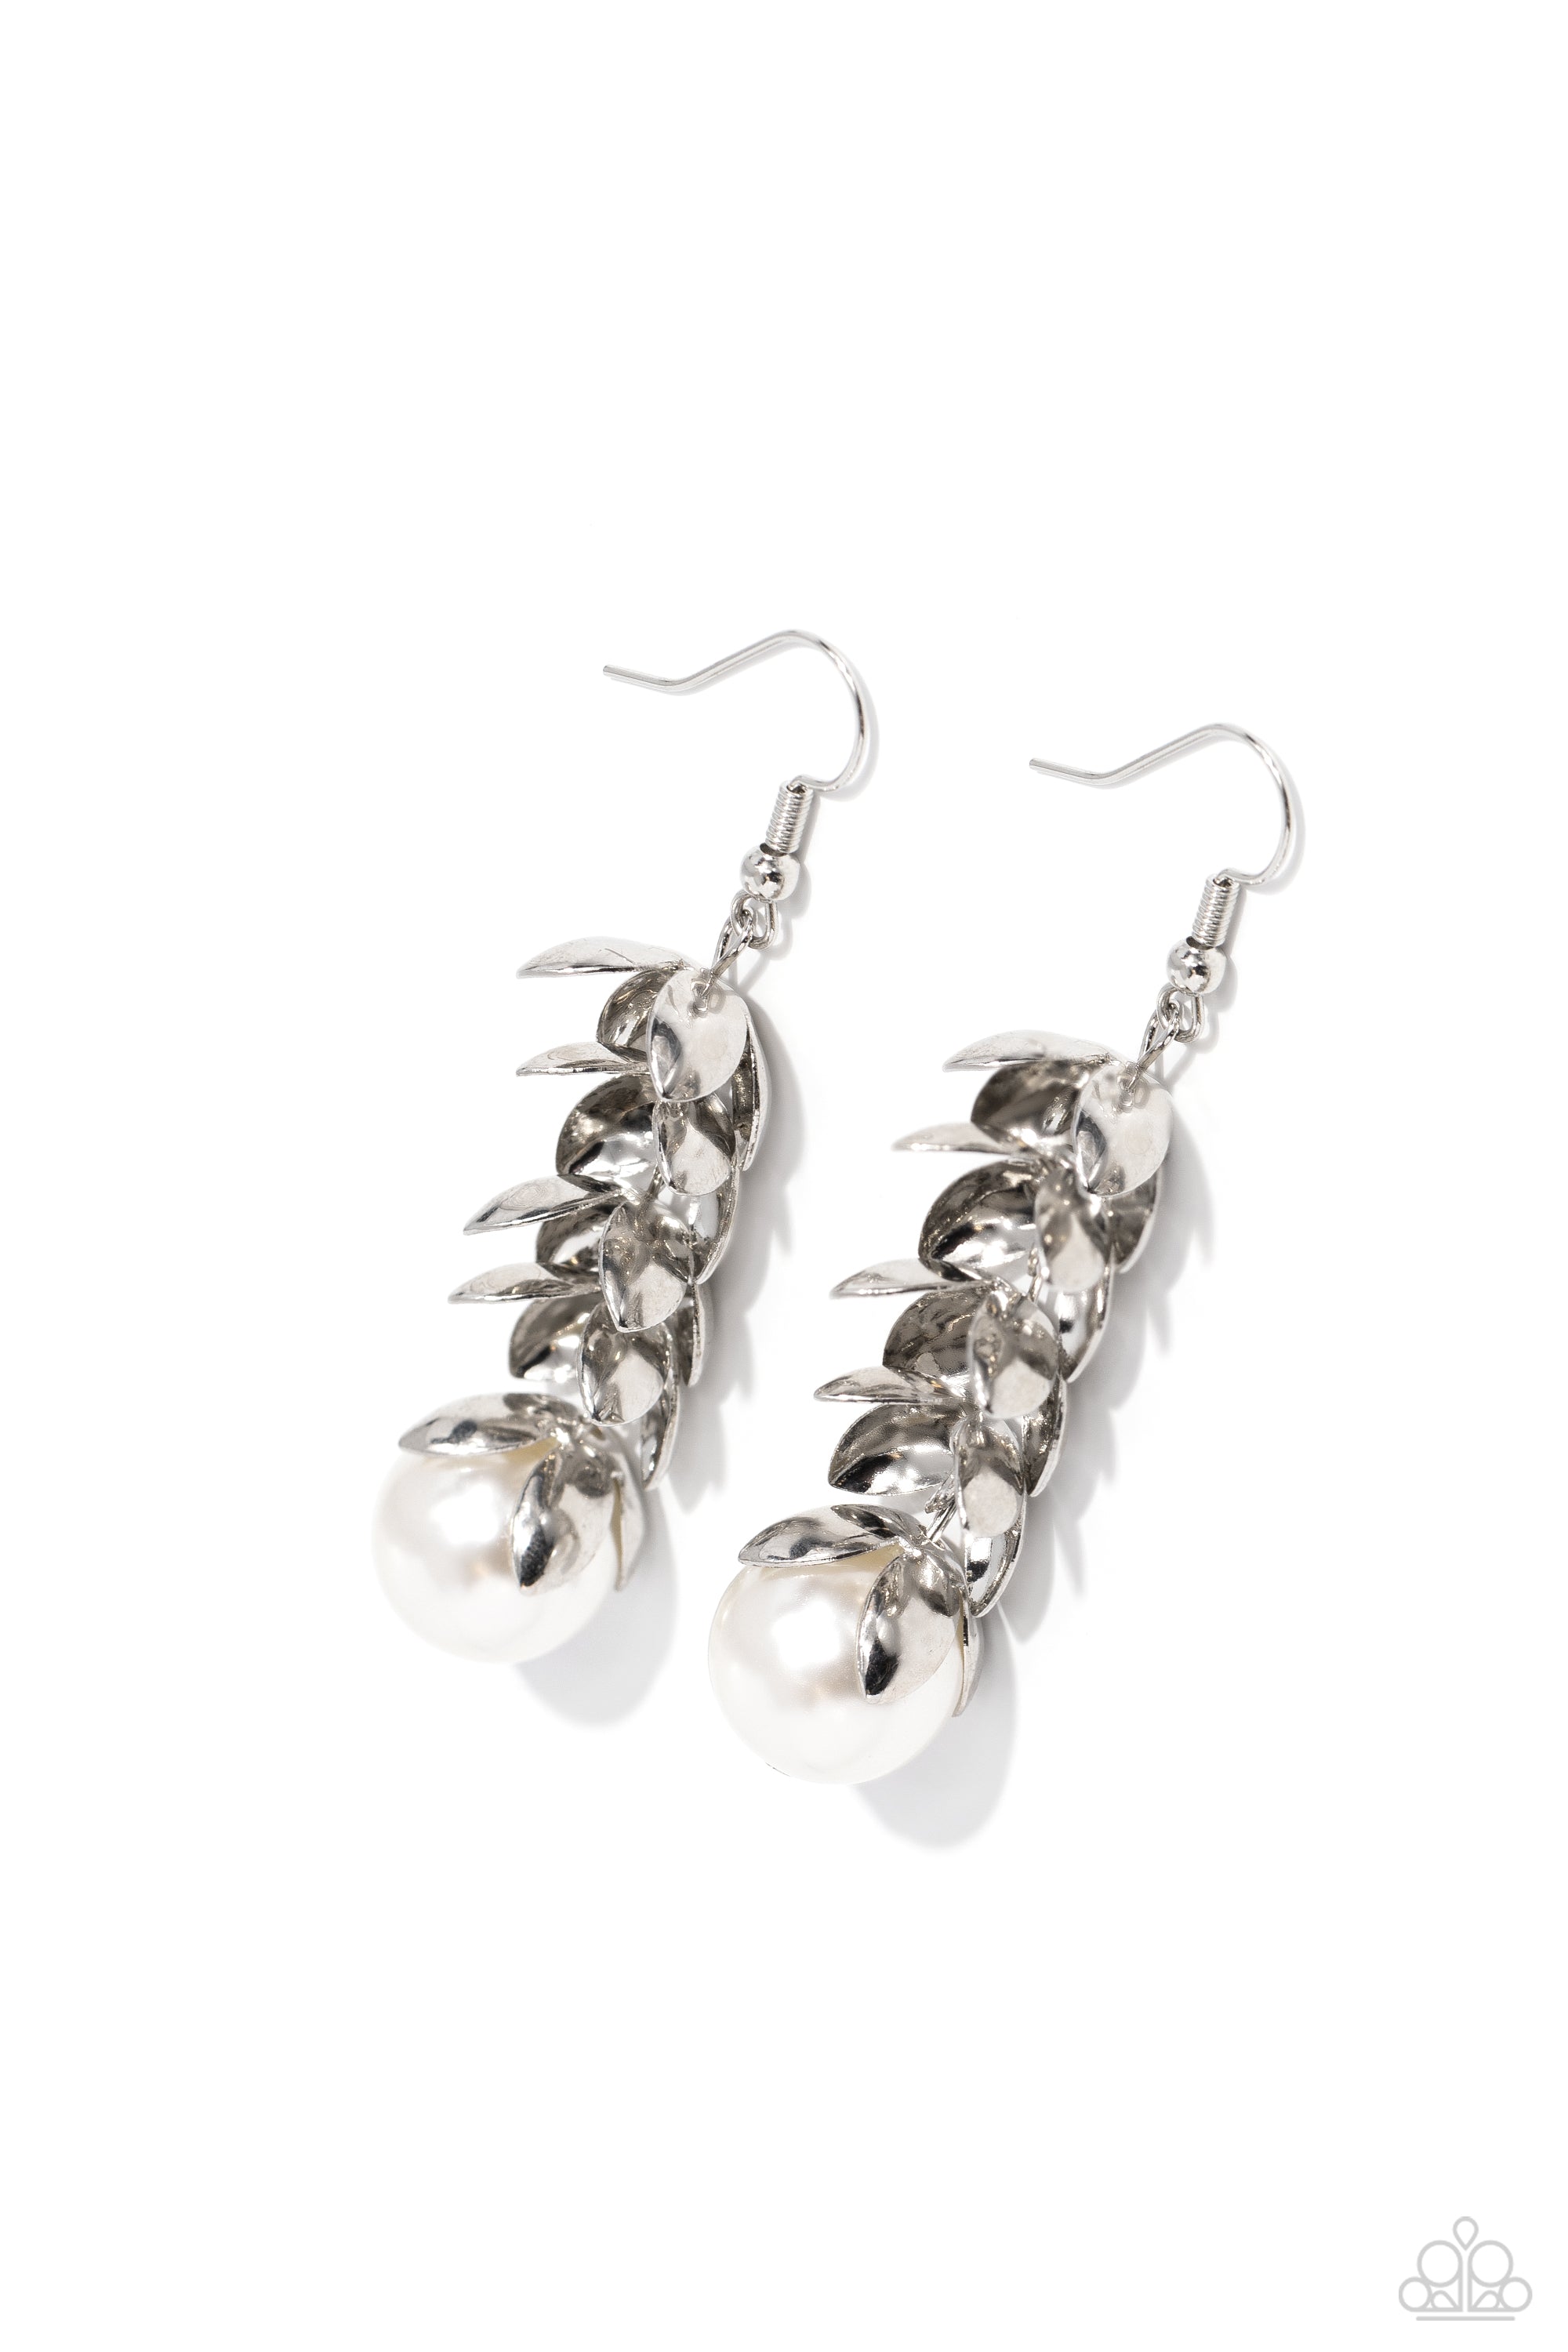 Ocean FROND Property White Pearl Earrings - Paparazzi Accessories- lightbox - CarasShop.com - $5 Jewelry by Cara Jewels